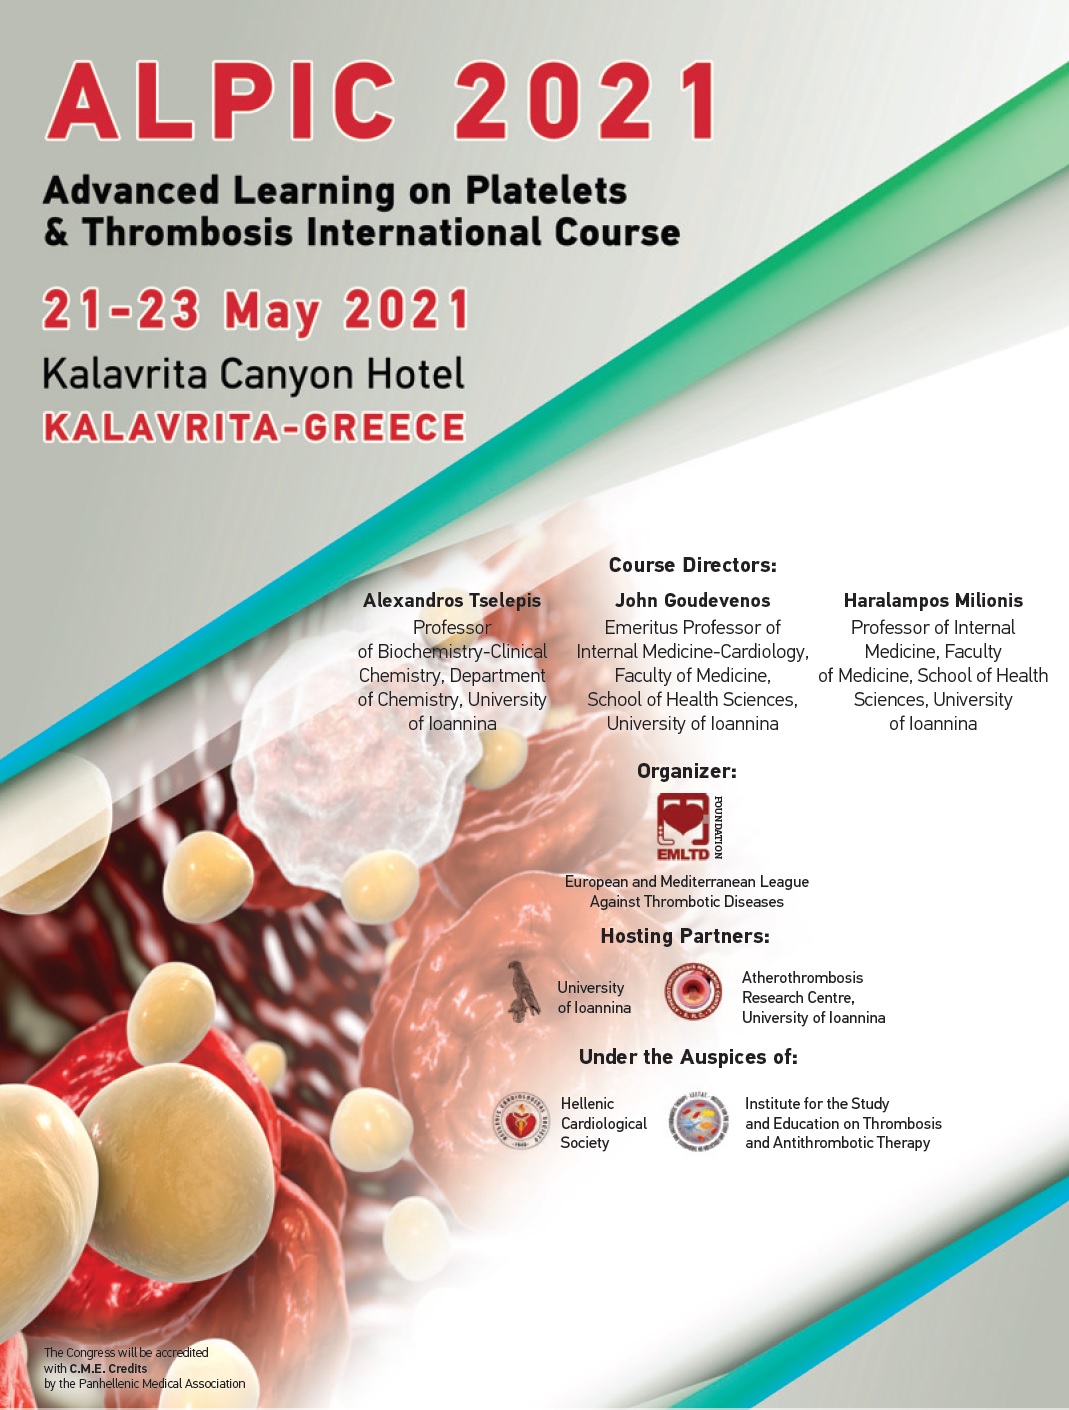 ALPIC 2021 – Advanced Learning on Platelets & Thrombosis International Course